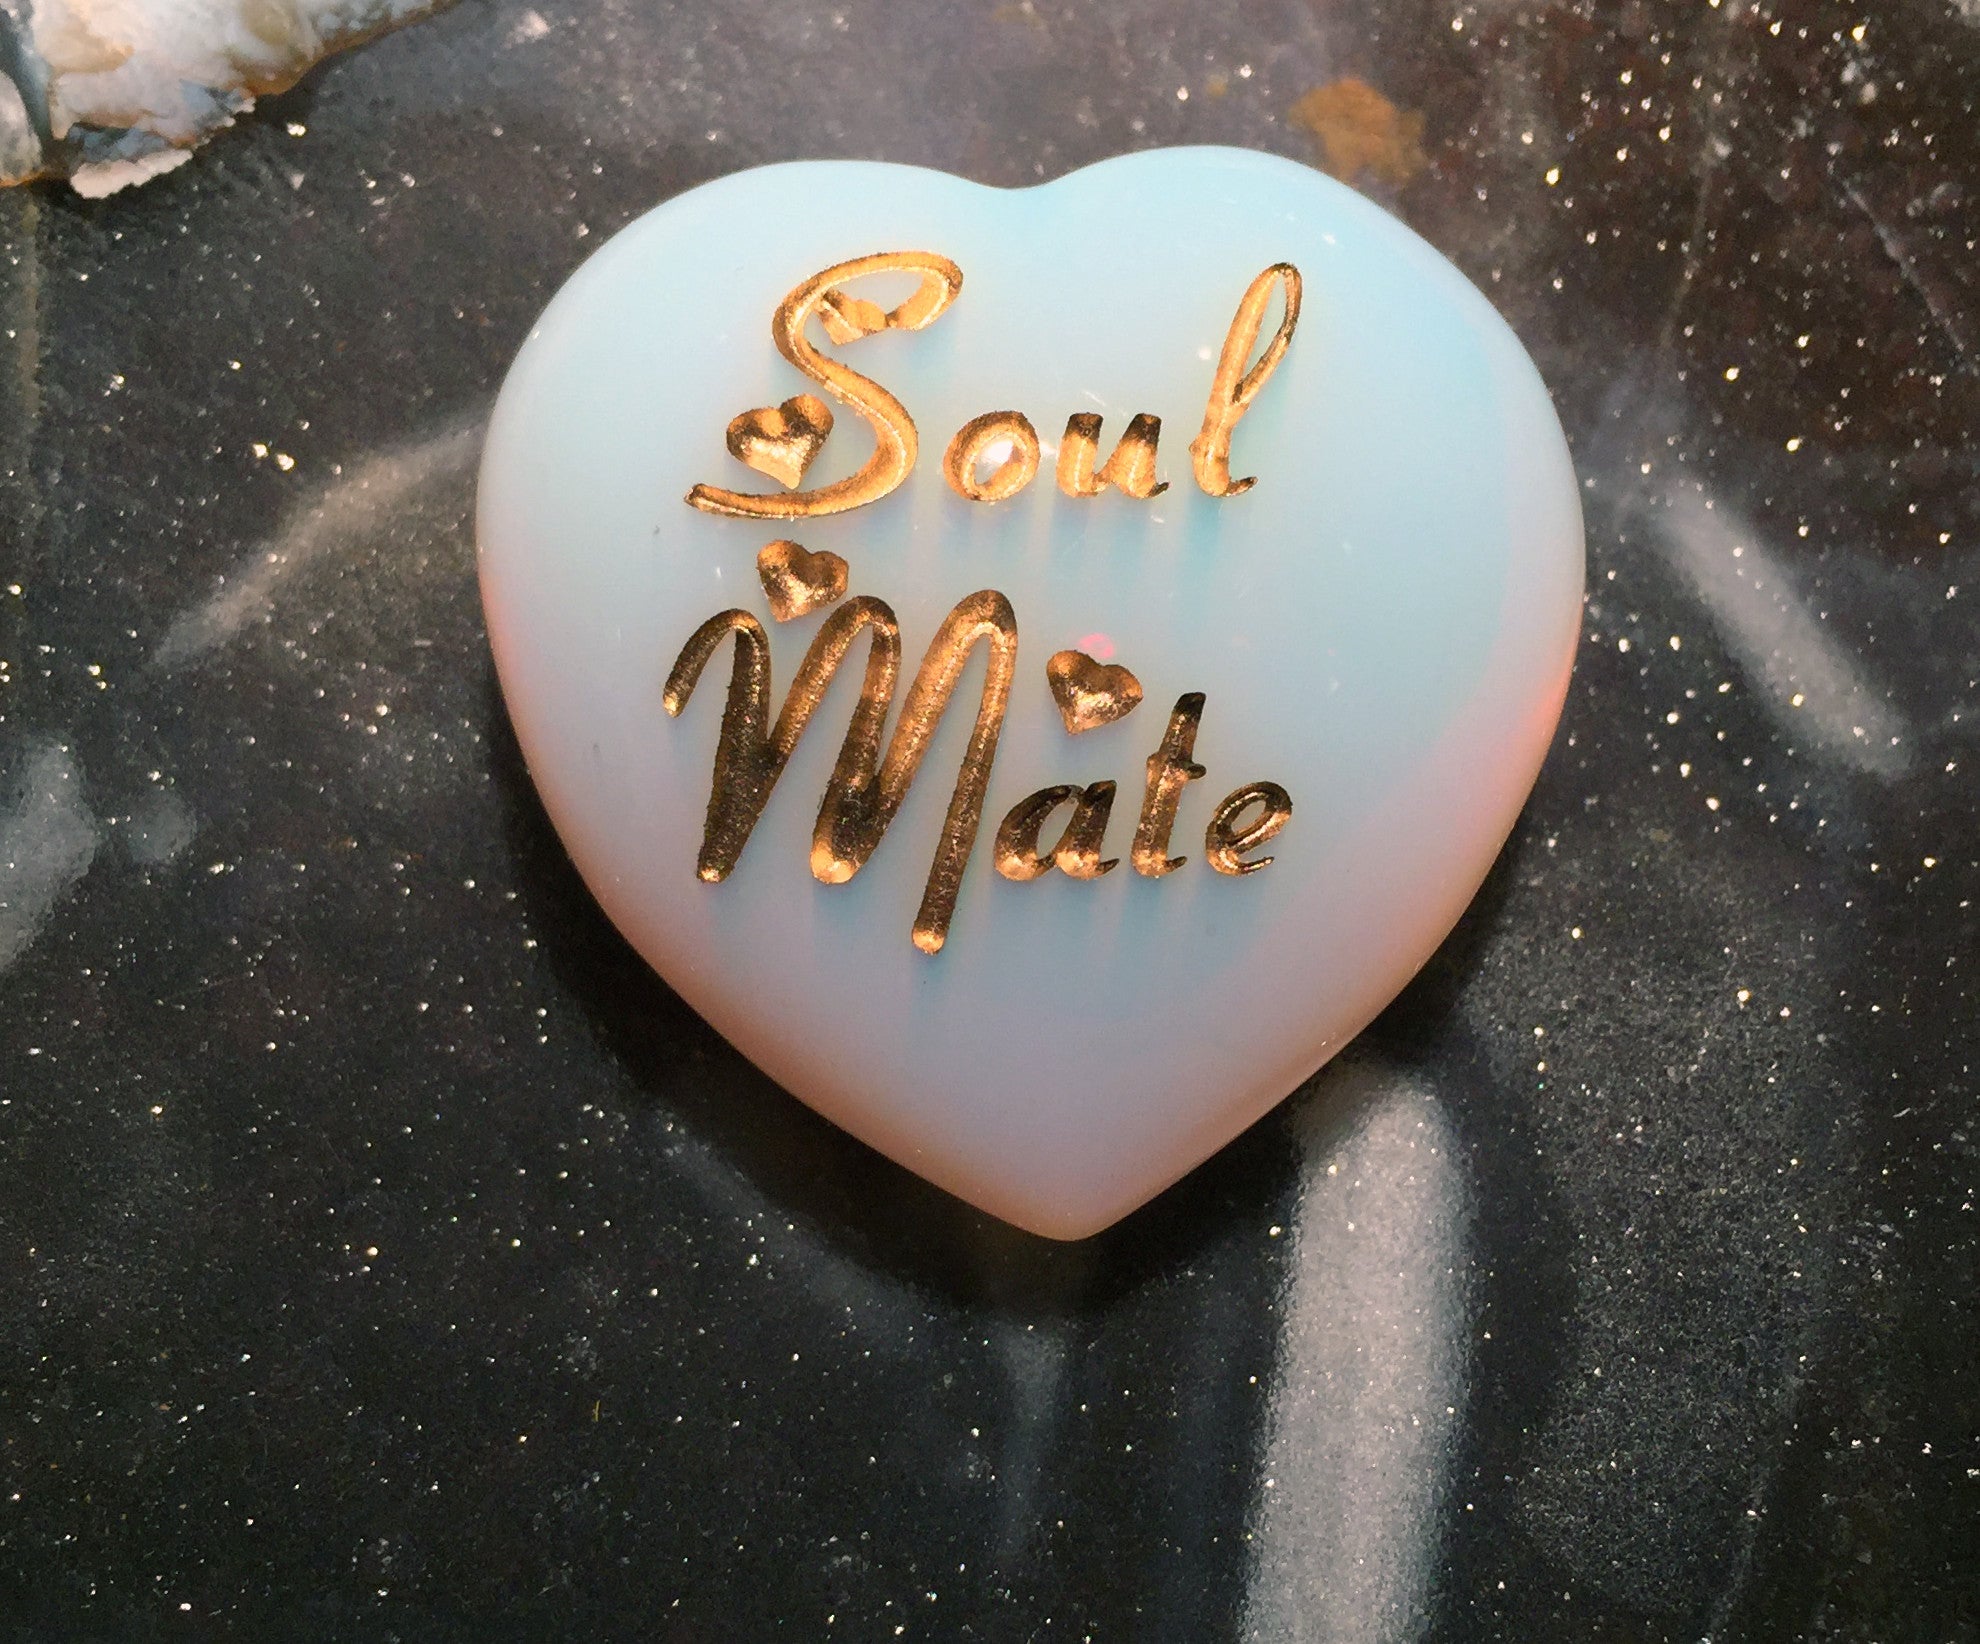 New! Soul Mate Intention Heart ~ Engraved Fiery Opalite crystal ~ The stone of Manifesting - Cast a Stone